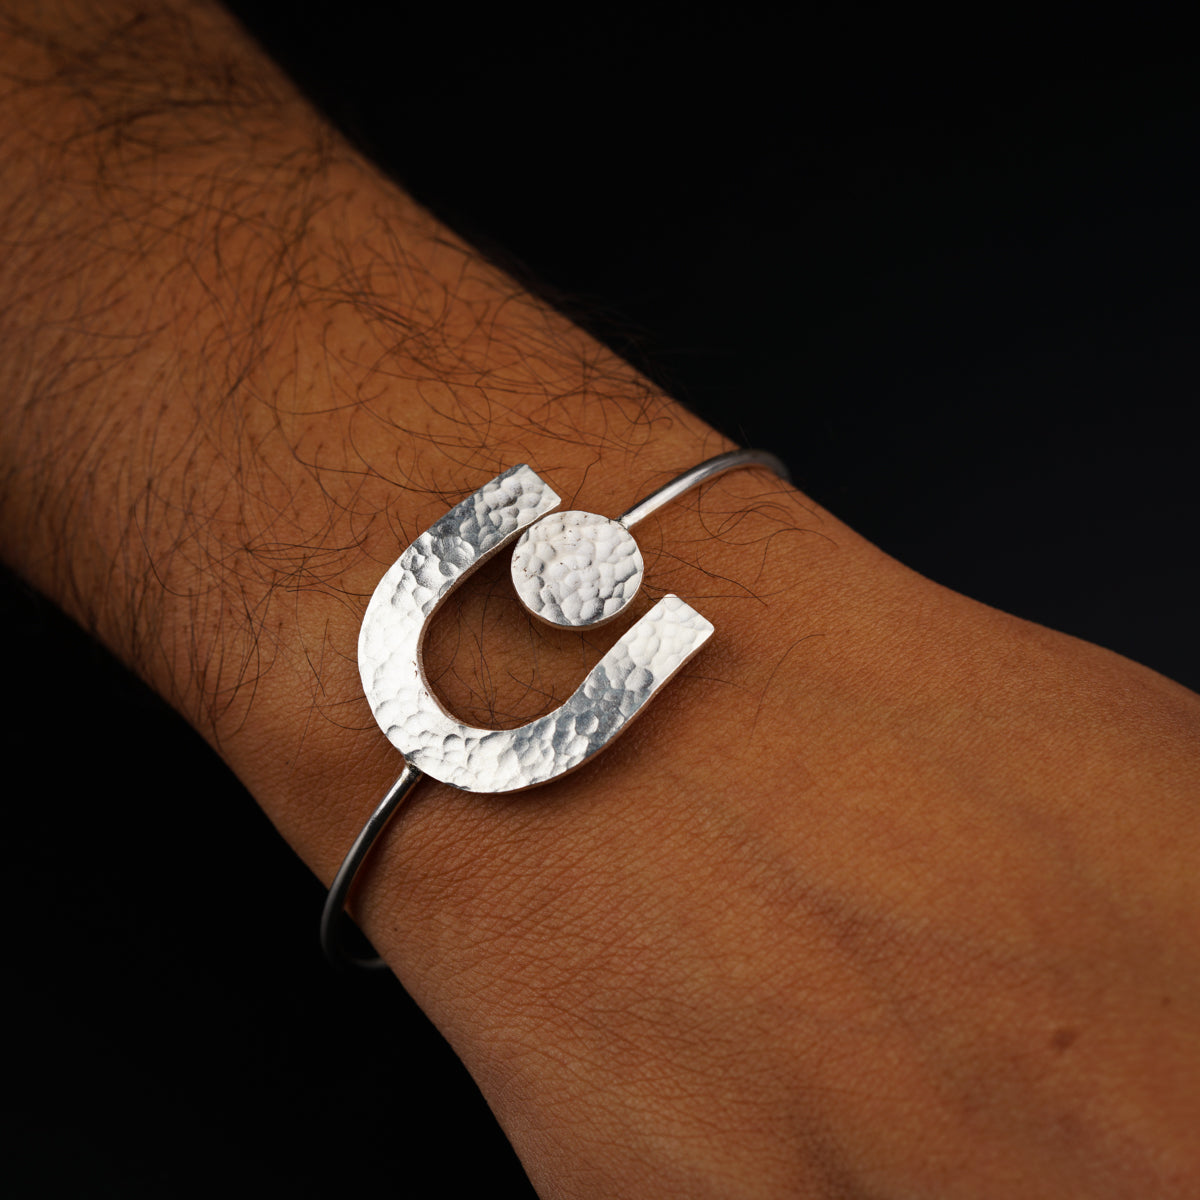 a person's arm with a silver bracelet on it